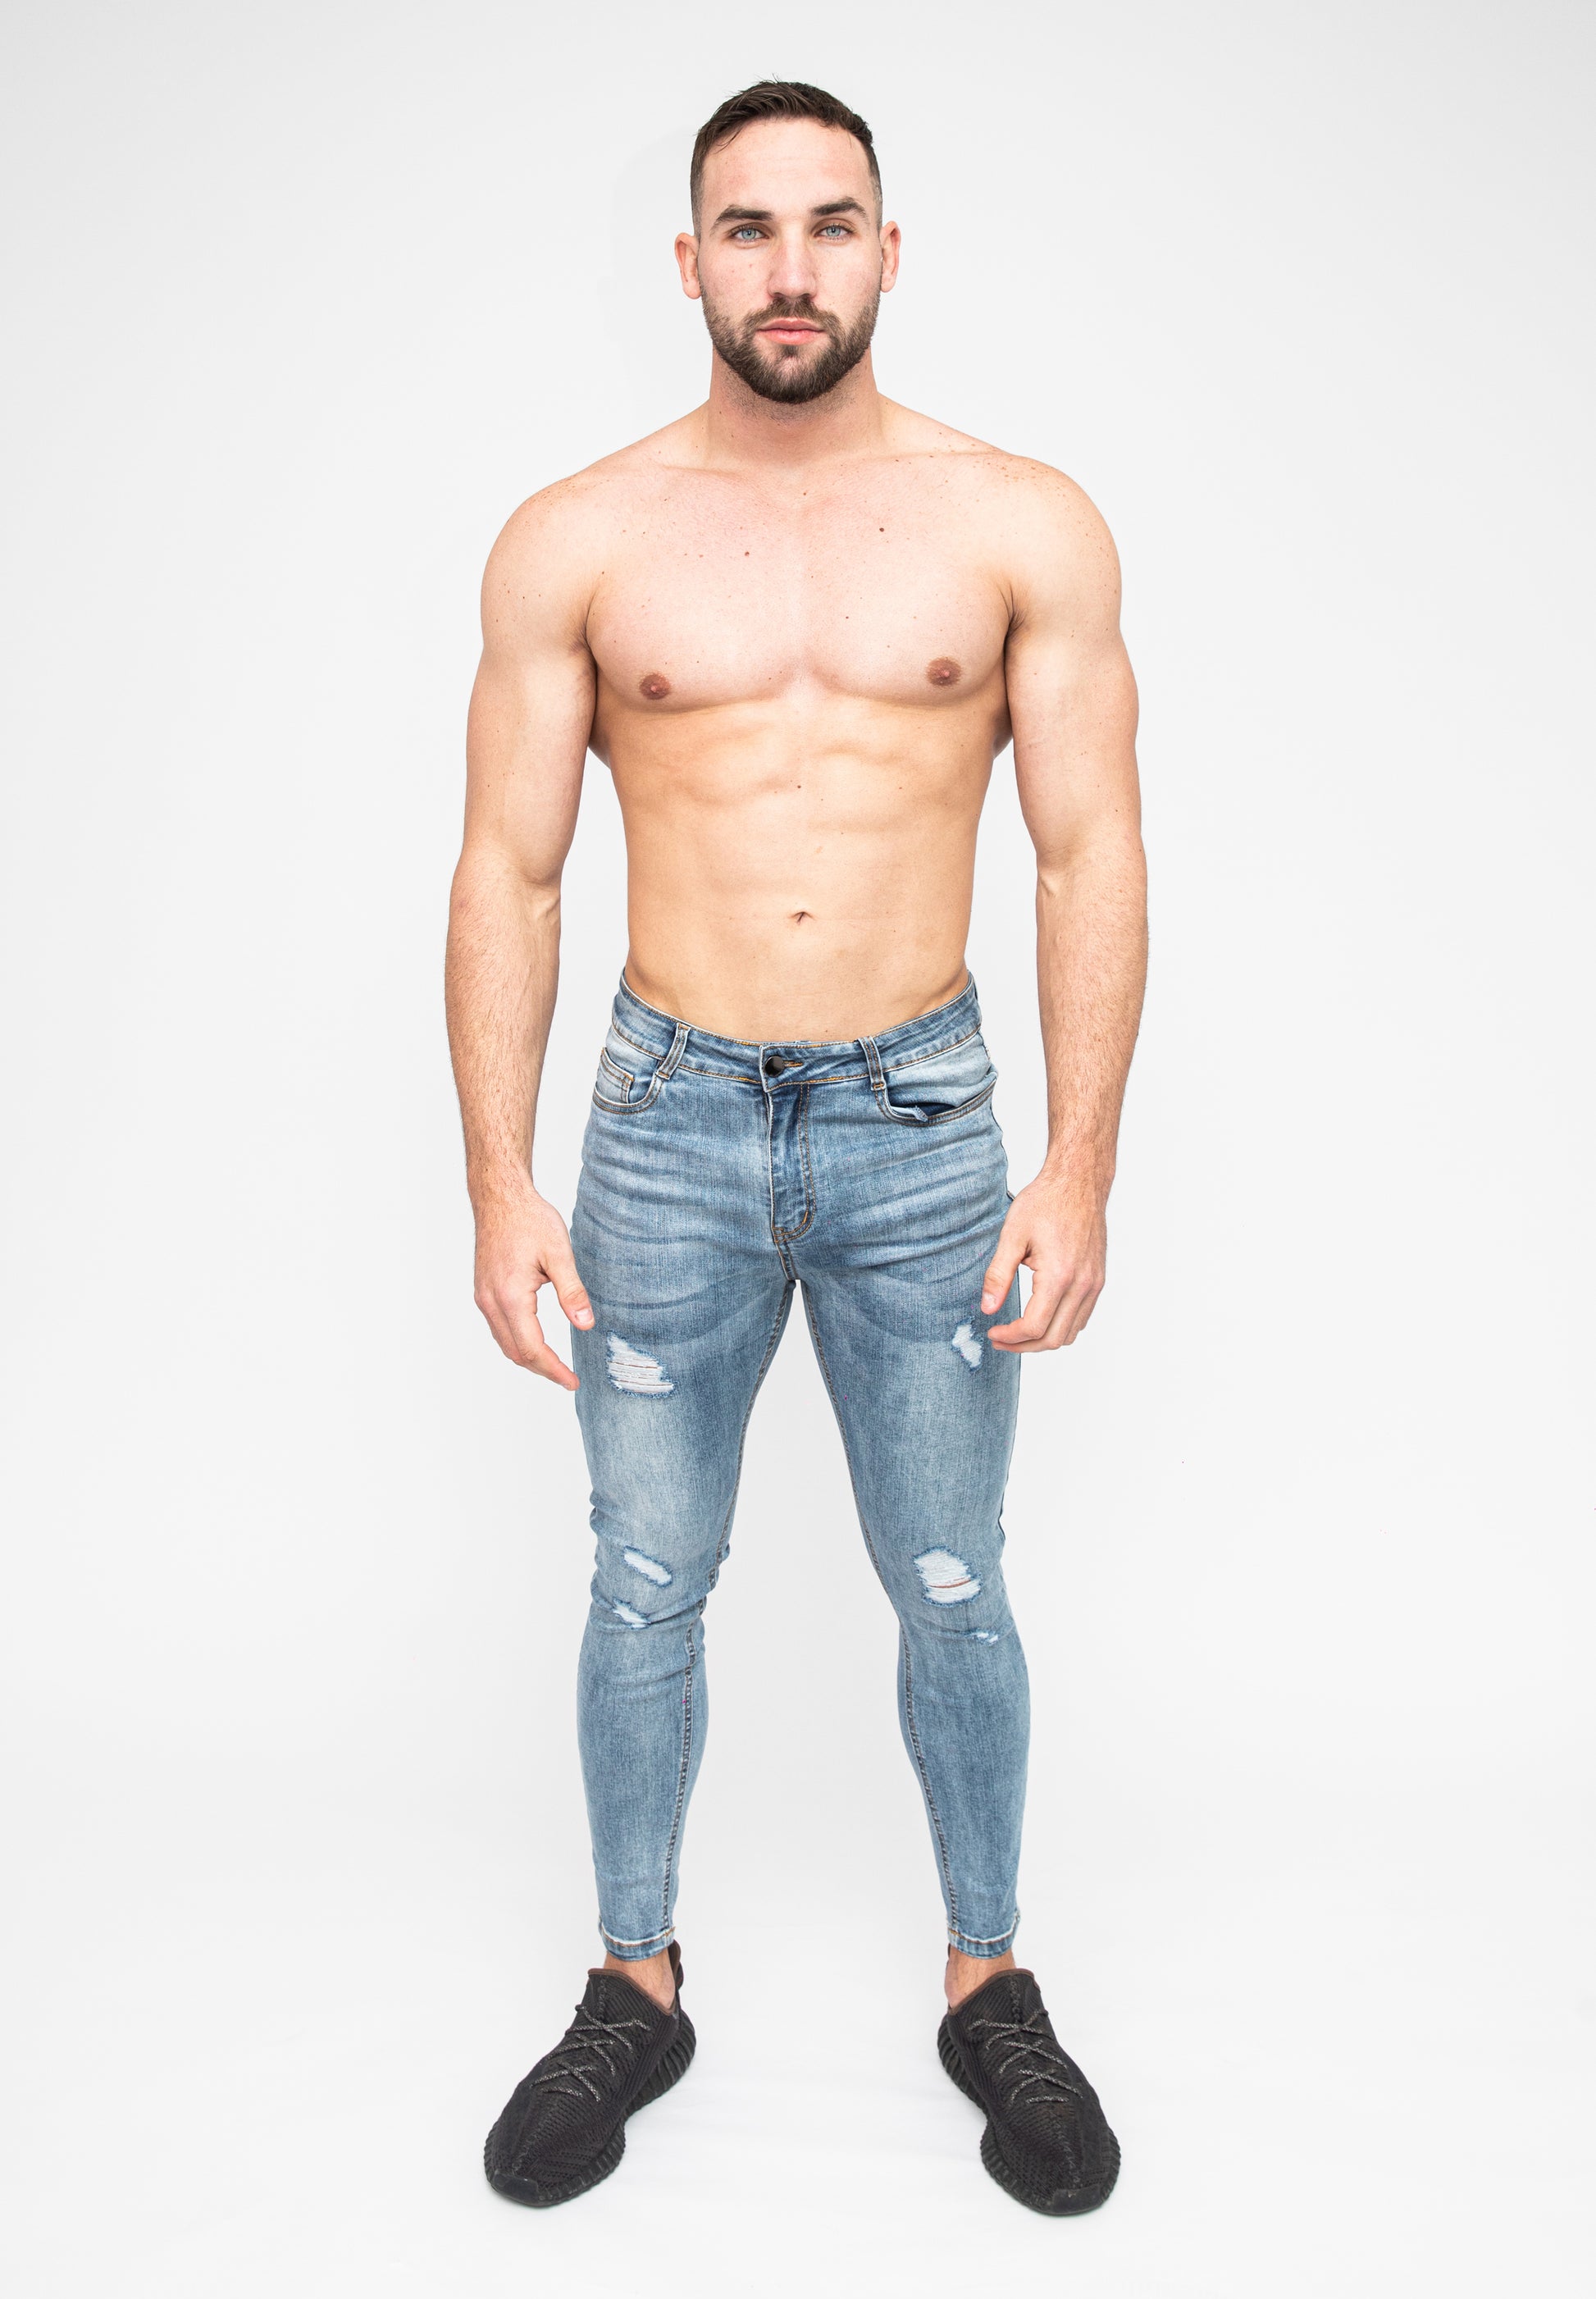 Blue Ripped Skinny Men's Jeans Front